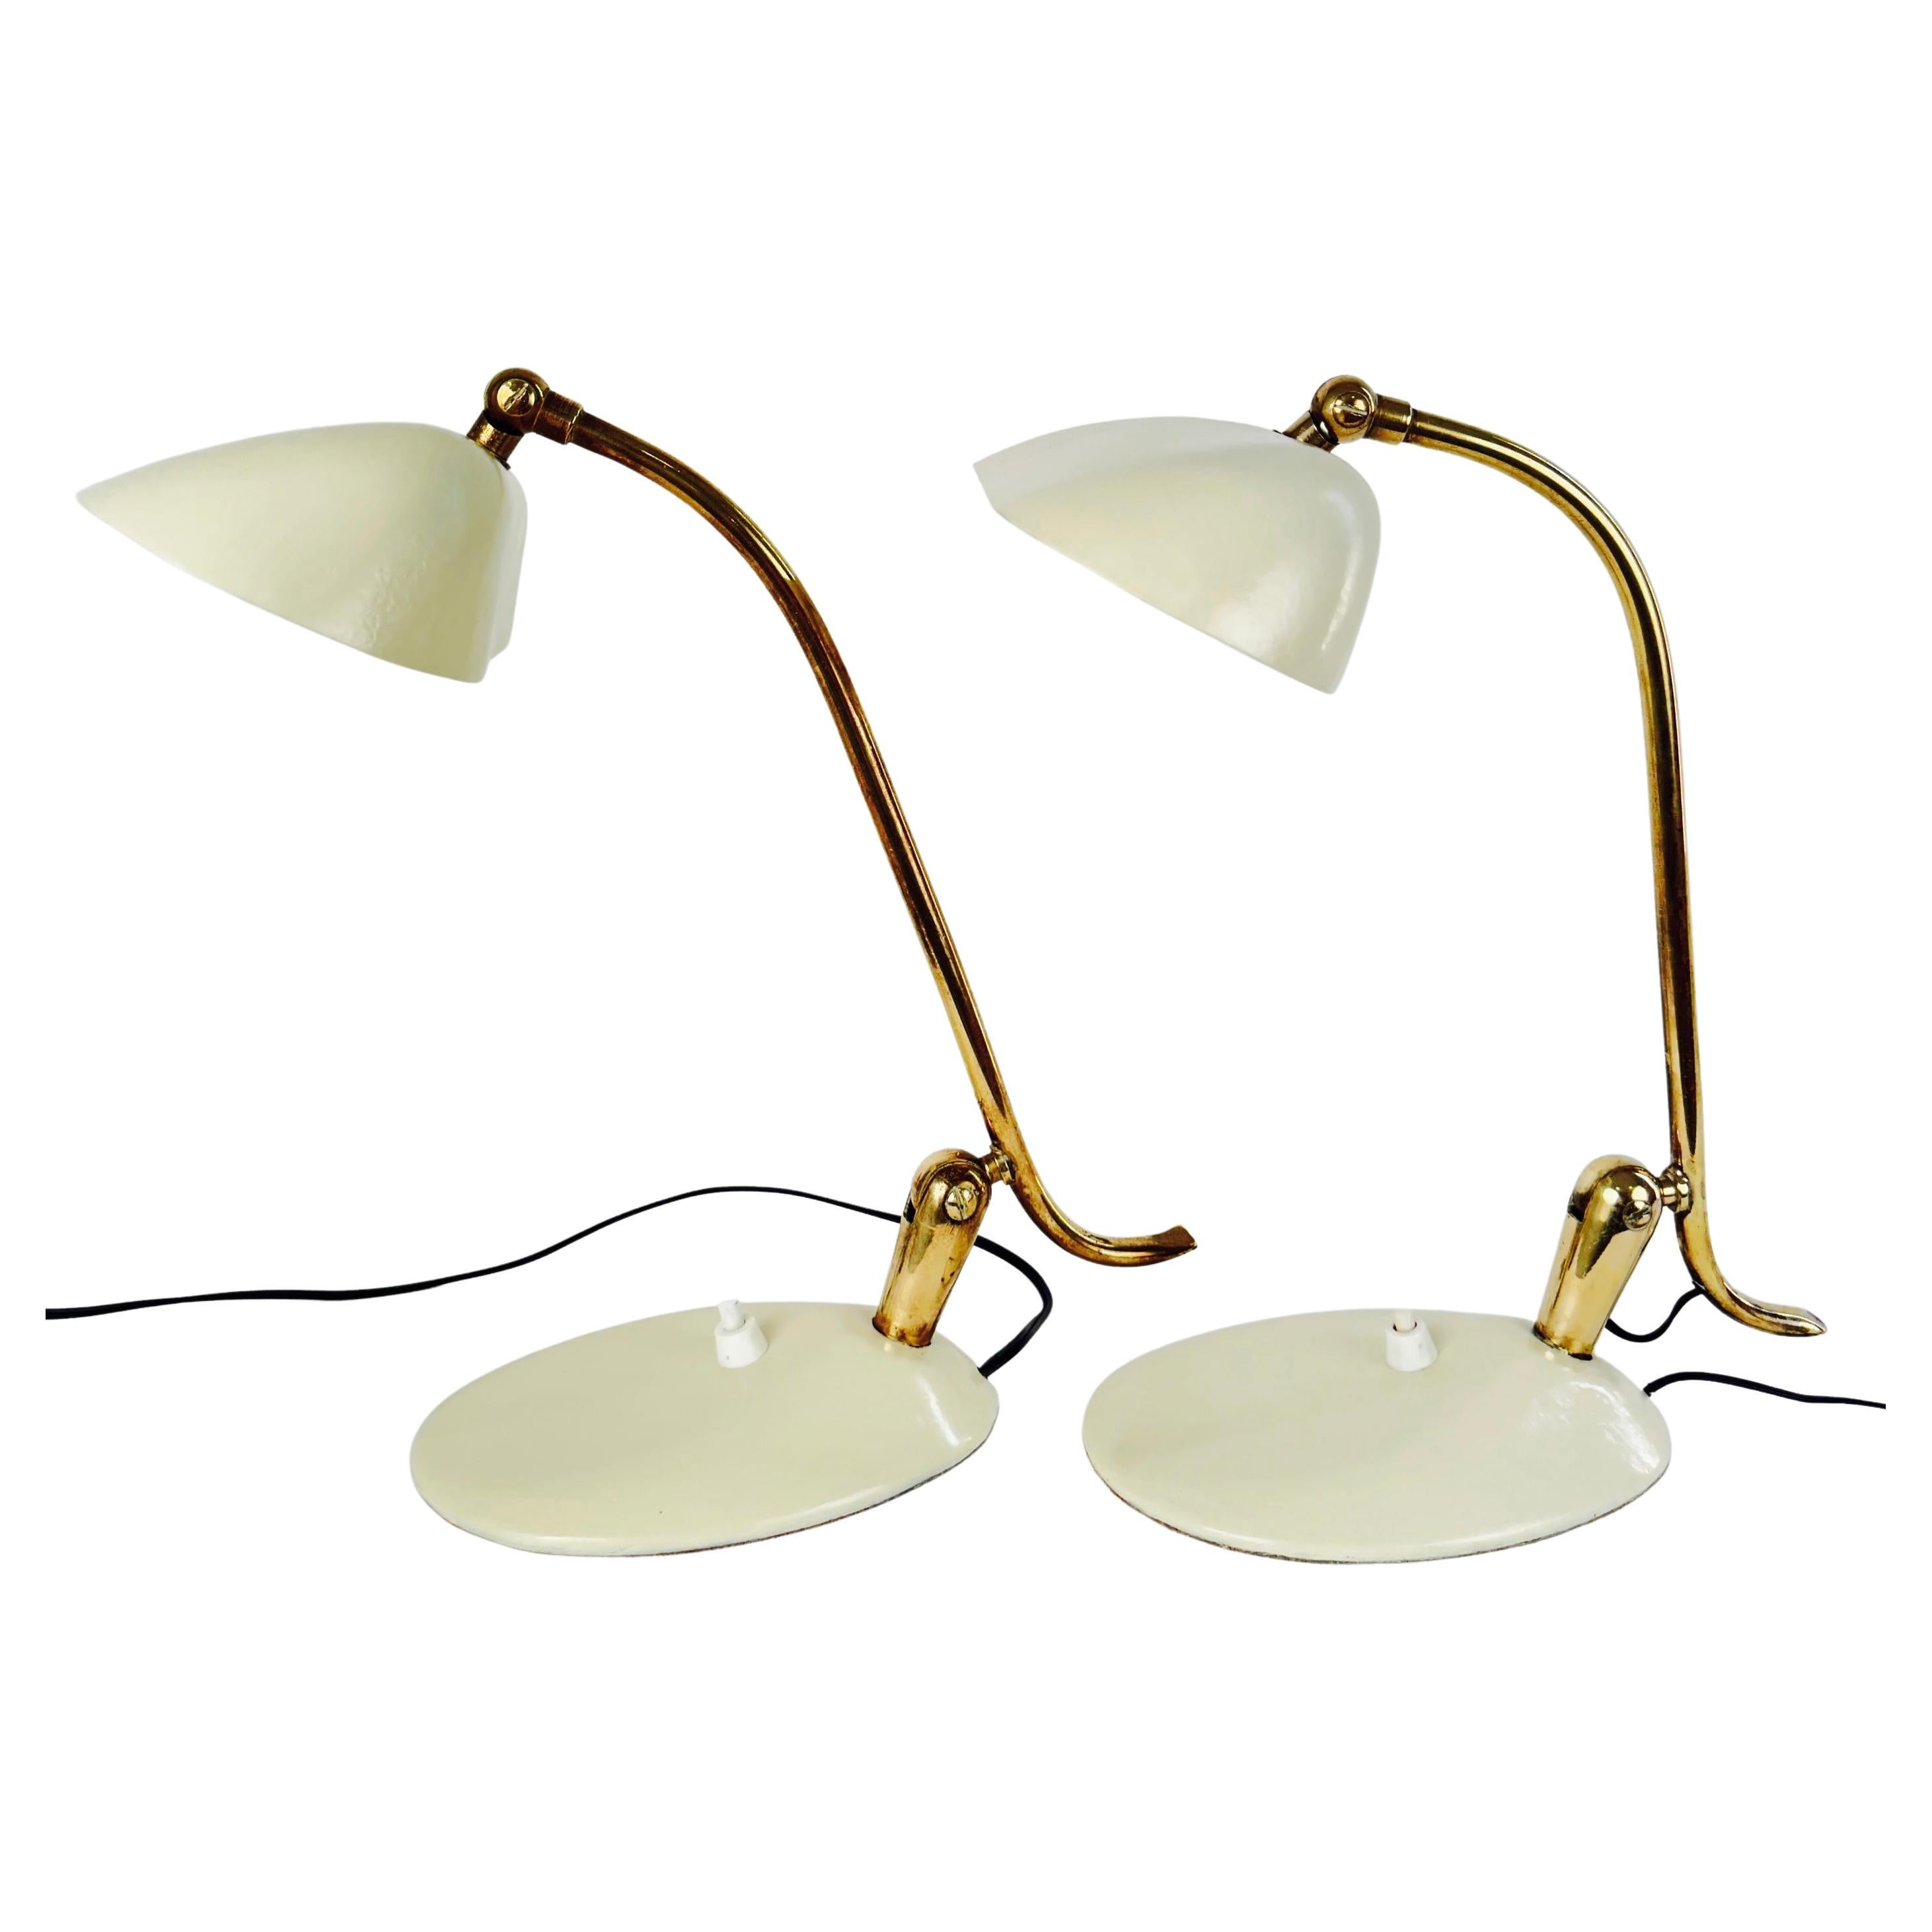 Stilnovo Pair of Table Lamps, Italy, 1950